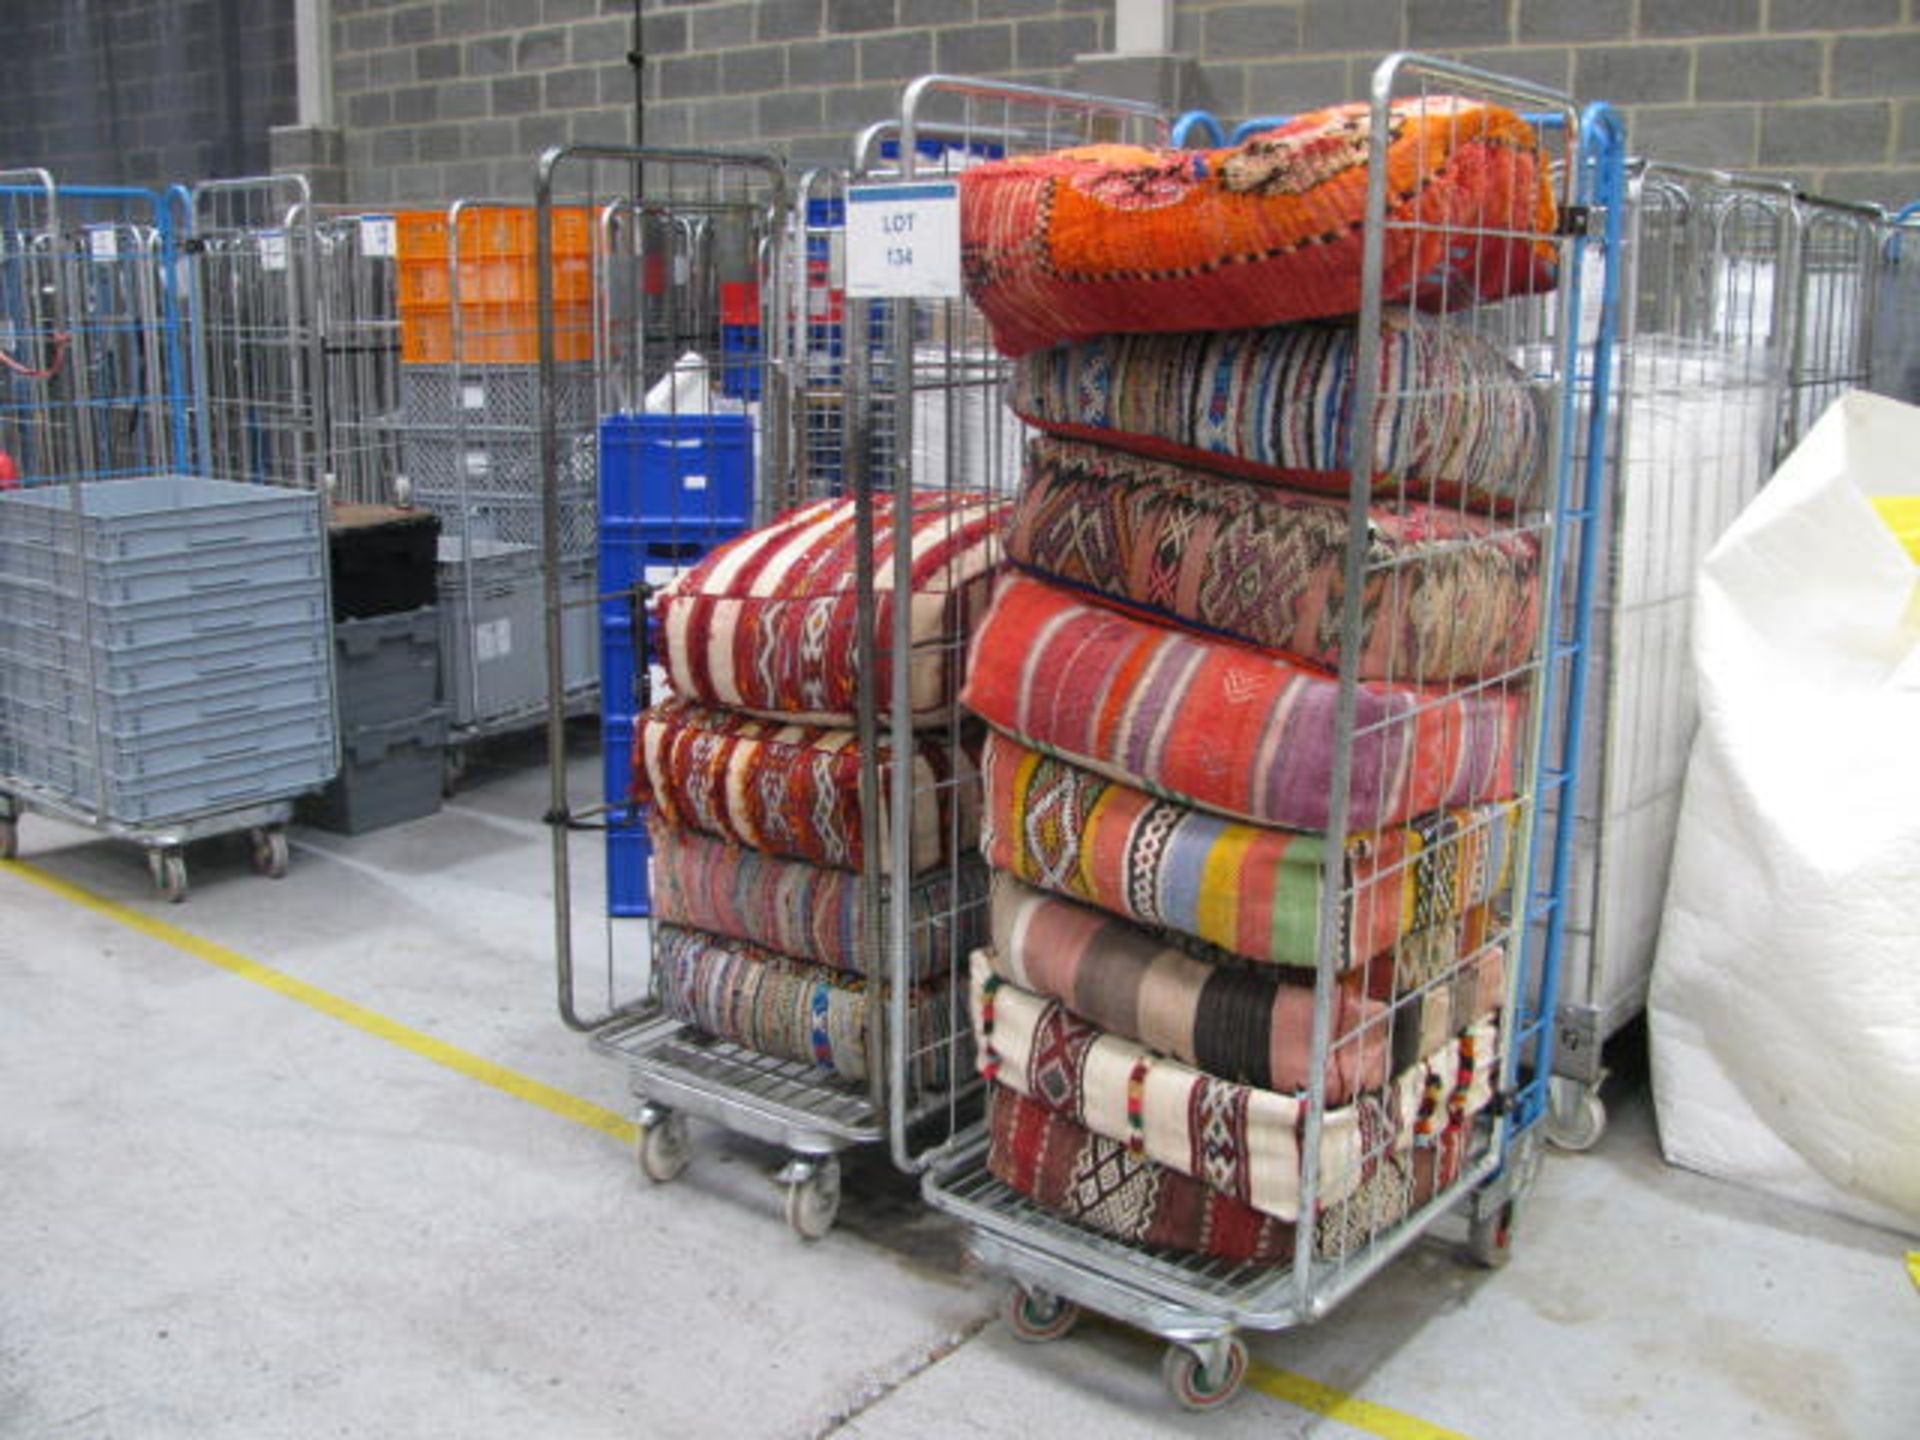 (2) Steel trolley cages with various Moroccan style cushions